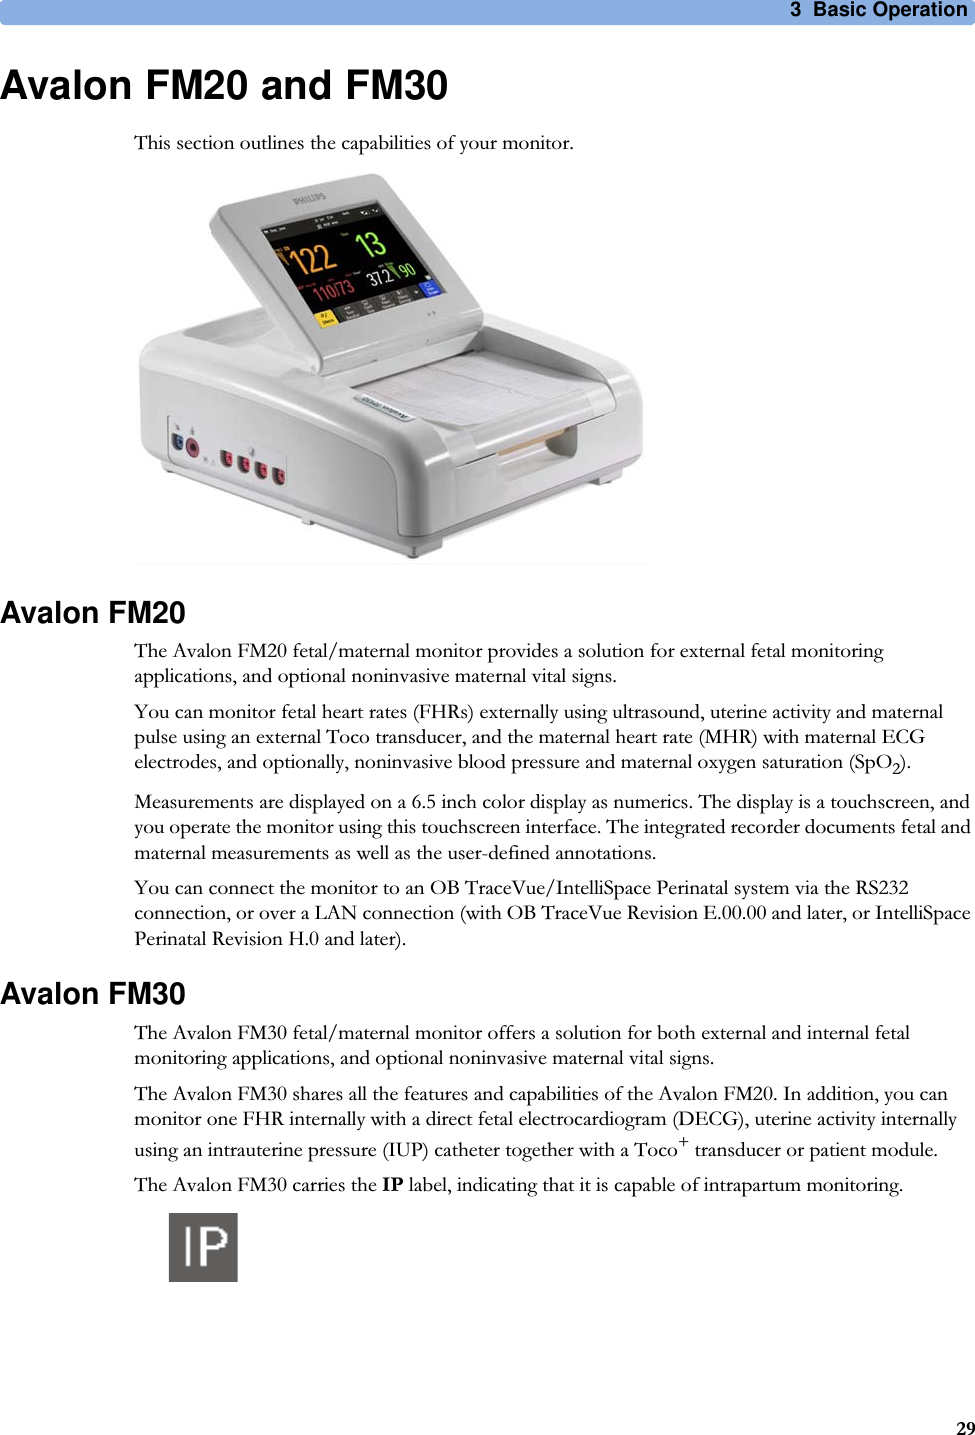 3  Basic Operation29Avalon FM20 and FM30This section outlines the capabilities of your monitor.Avalon FM20The Avalon FM20 fetal/maternal monitor provides a solution for external fetal monitoring applications, and optional noninvasive maternal vital signs.You can monitor fetal heart rates (FHRs) externally using ultrasound, uterine activity and maternal pulse using an external Toco transducer, and the maternal heart rate (MHR) with maternal ECG electrodes, and optionally, noninvasive blood pressure and maternal oxygen saturation (SpO2).Measurements are displayed on a 6.5 inch color display as numerics. The display is a touchscreen, and you operate the monitor using this touchscreen interface. The integrated recorder documents fetal and maternal measurements as well as the user-defined annotations.You can connect the monitor to an OB TraceVue/IntelliSpace Perinatal system via the RS232 connection, or over a LAN connection (with OB TraceVue Revision E.00.00 and later, or IntelliSpace Perinatal Revision H.0 and later).Avalon FM30The Avalon FM30 fetal/maternal monitor offers a solution for both external and internal fetal monitoring applications, and optional noninvasive maternal vital signs.The Avalon FM30 shares all the features and capabilities of the Avalon FM20. In addition, you can monitor one FHR internally with a direct fetal electrocardiogram (DECG), uterine activity internally using an intrauterine pressure (IUP) catheter together with a Toco+ transducer or patient module.The Avalon FM30 carries the IP label, indicating that it is capable of intrapartum monitoring.